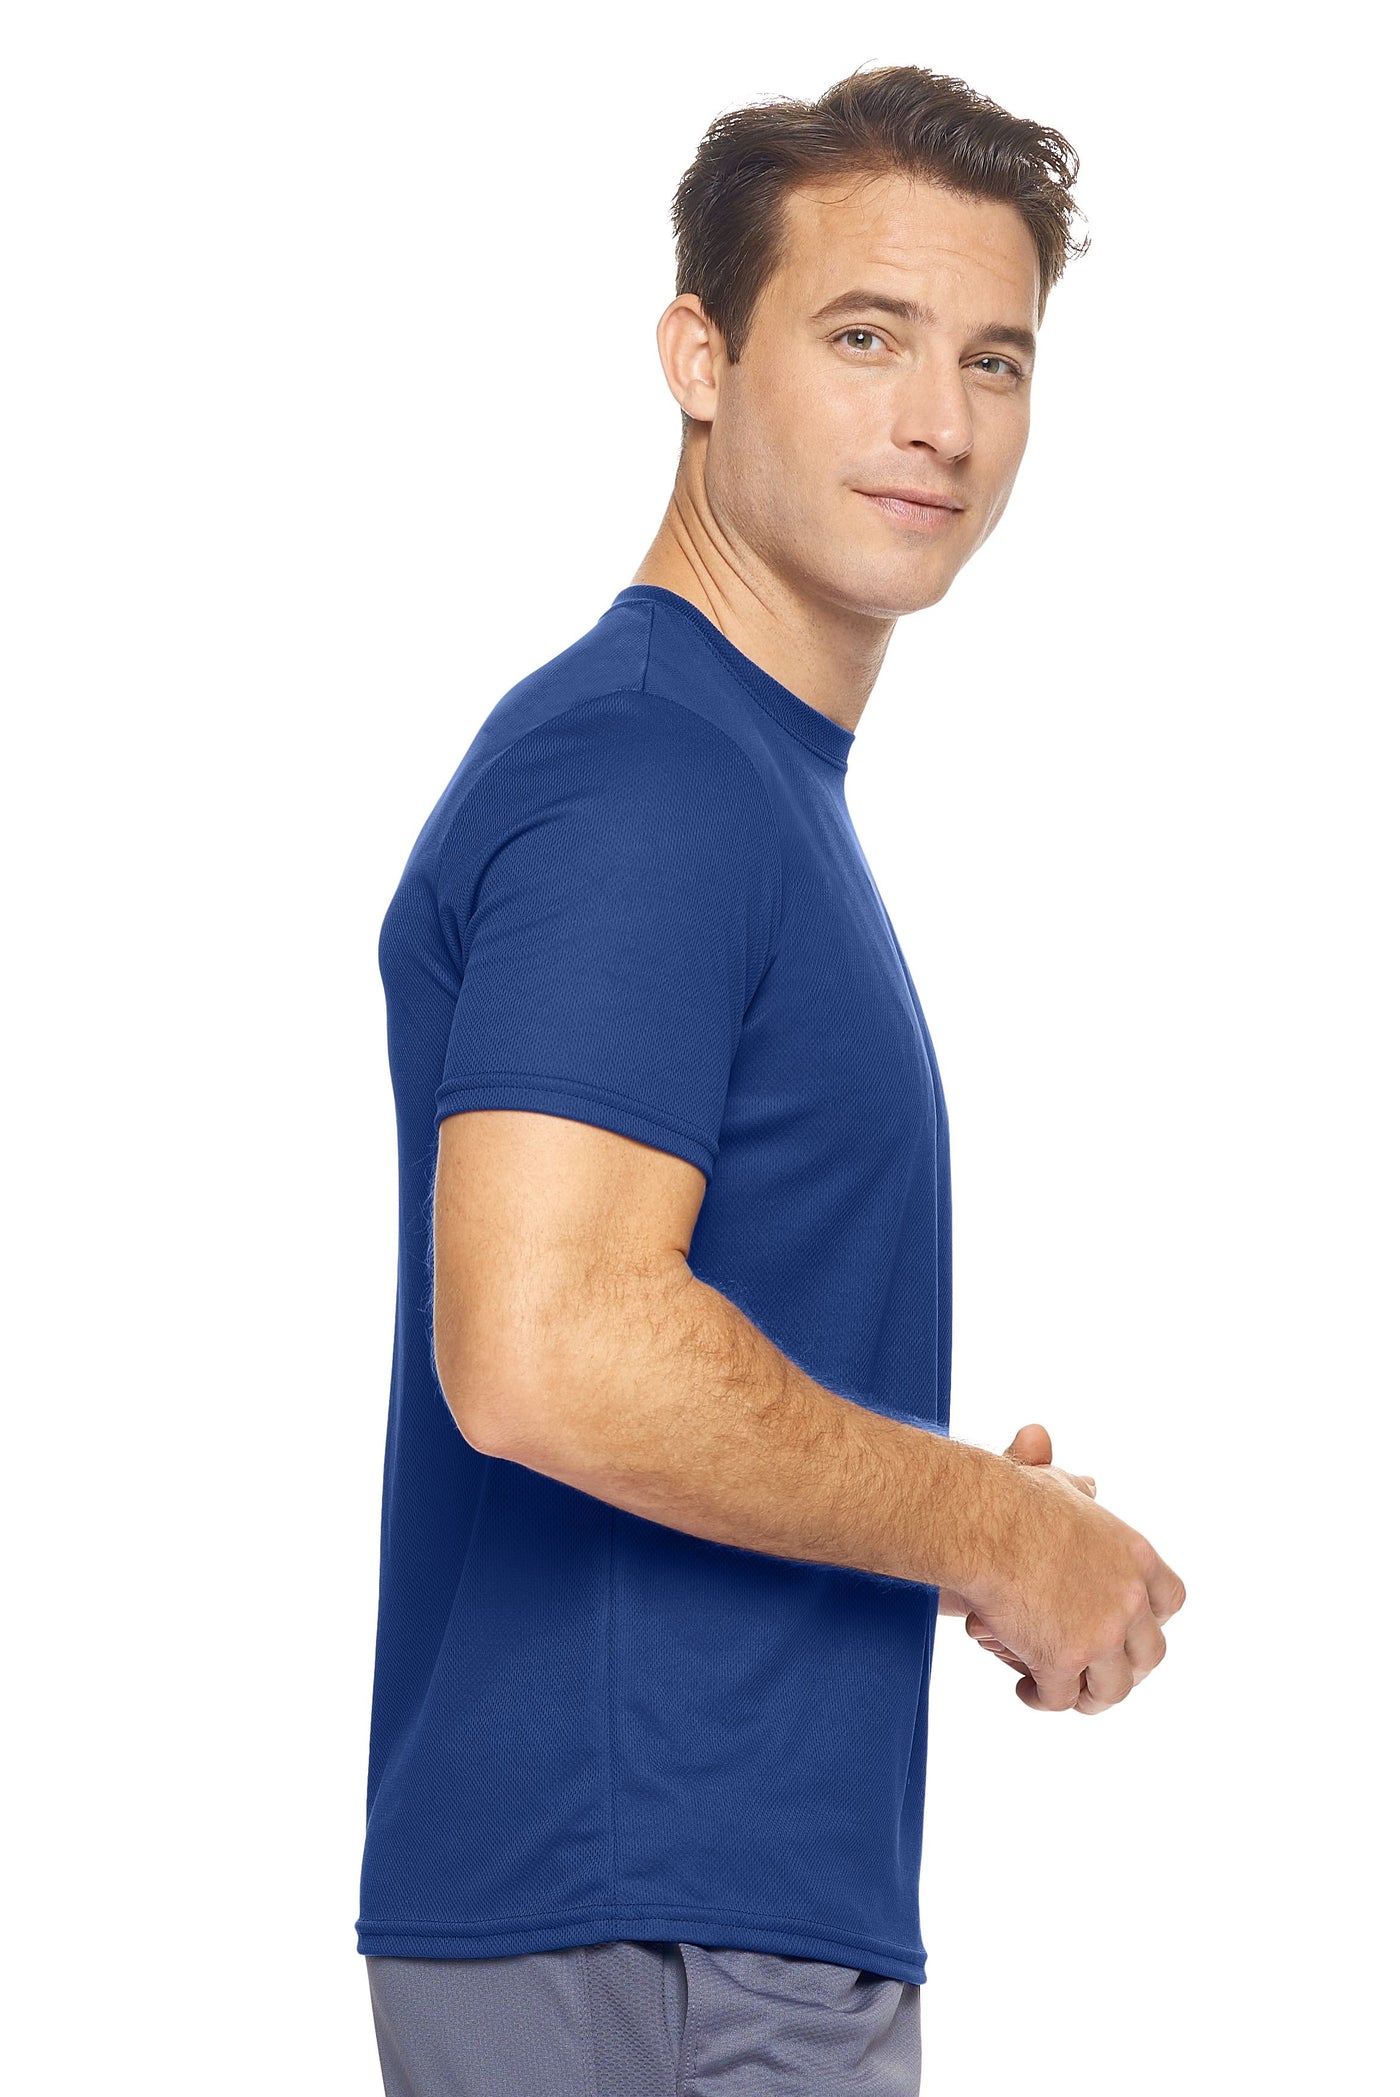 Expert Brand Retail Sportswear Made in USA Men's Oxymesh™ Crewneck Tec Tee navy blue 2#color_navy